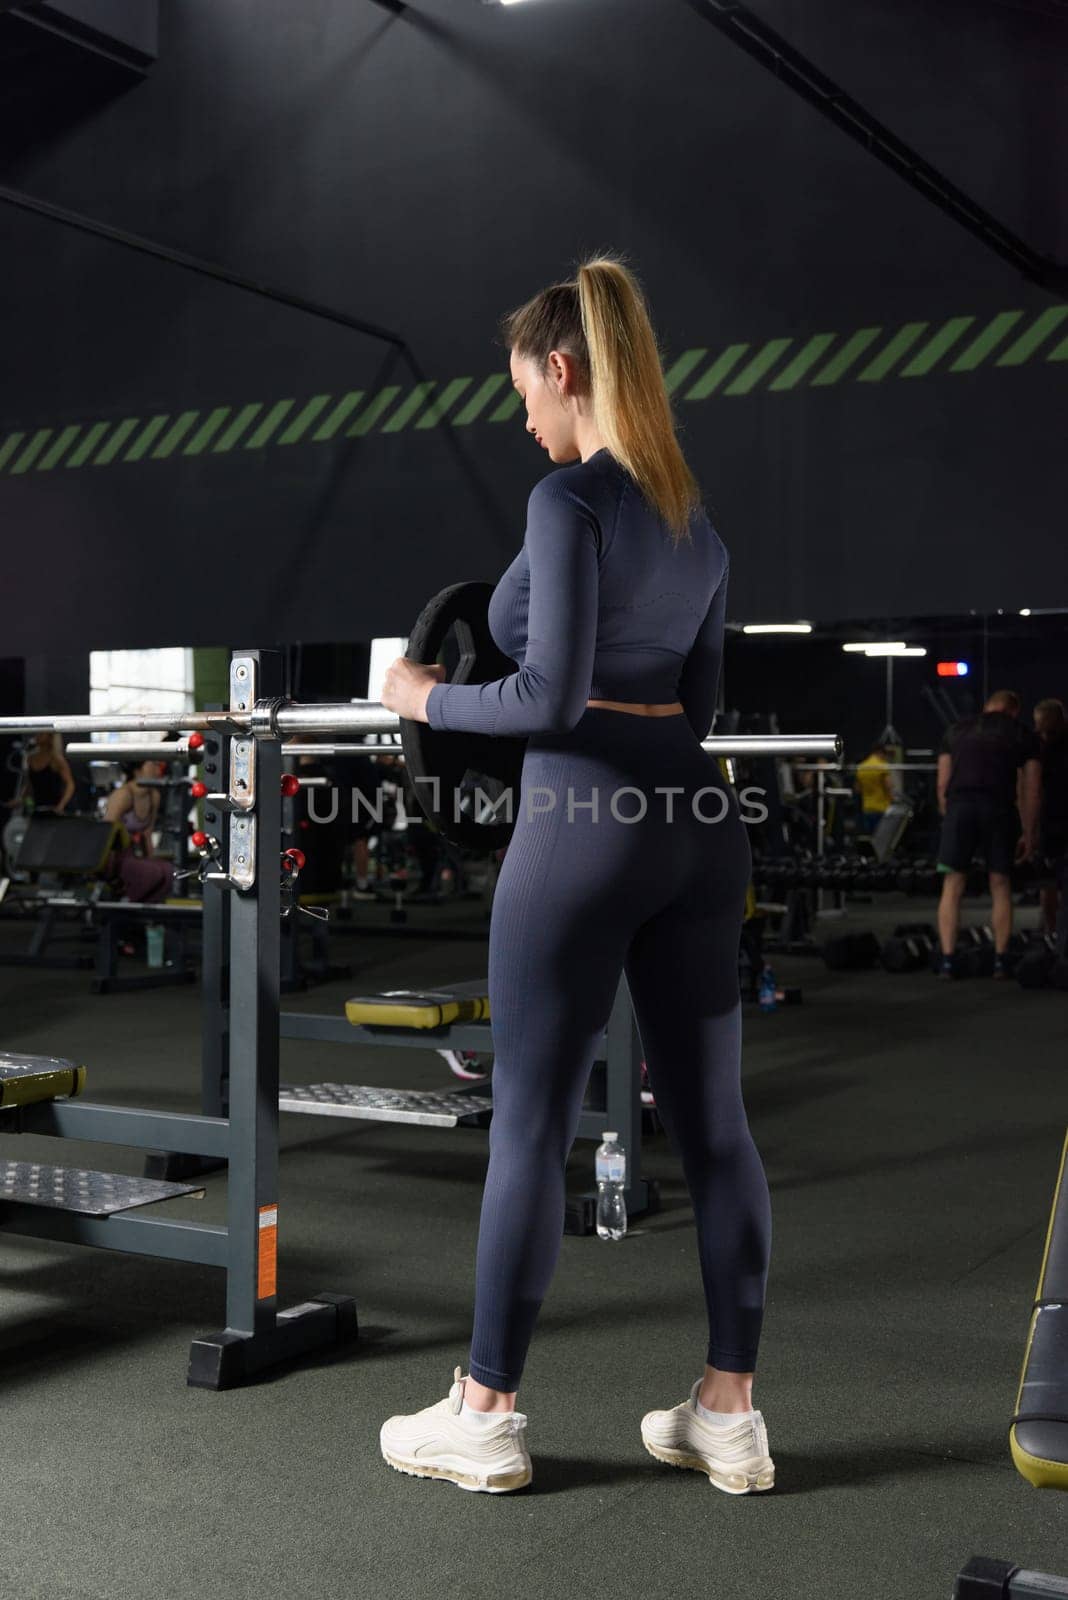 One adult caucasian woman female athlete putting weight plate on the barbel at gym. wearing blue leggins and long sleeve top